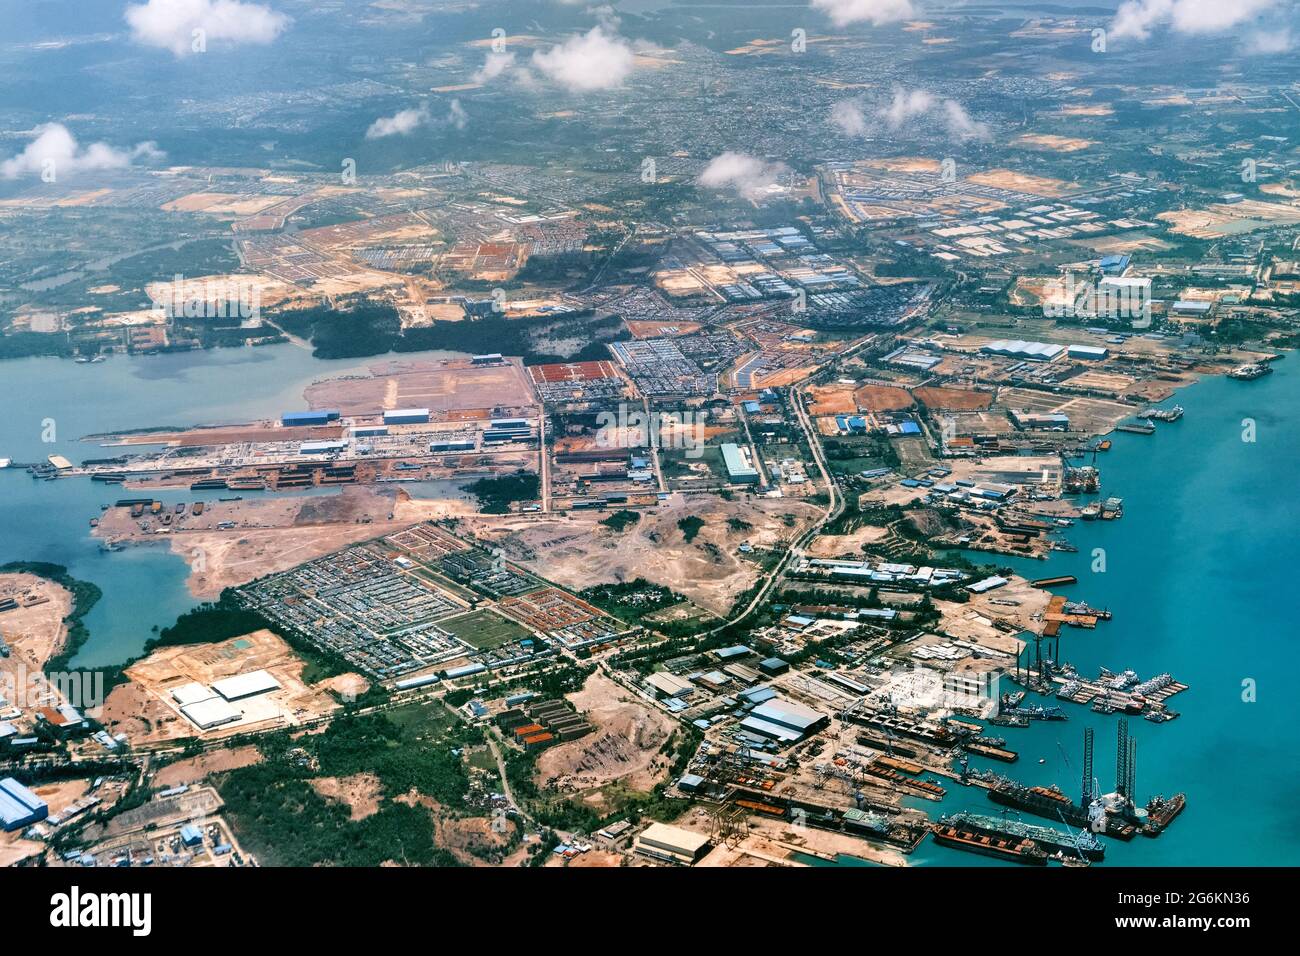 Aerial view of coastal construction or port areas in Strait of Malacca, on airplane route to Malaysia or Singapore. Airplane shot Stock Photo